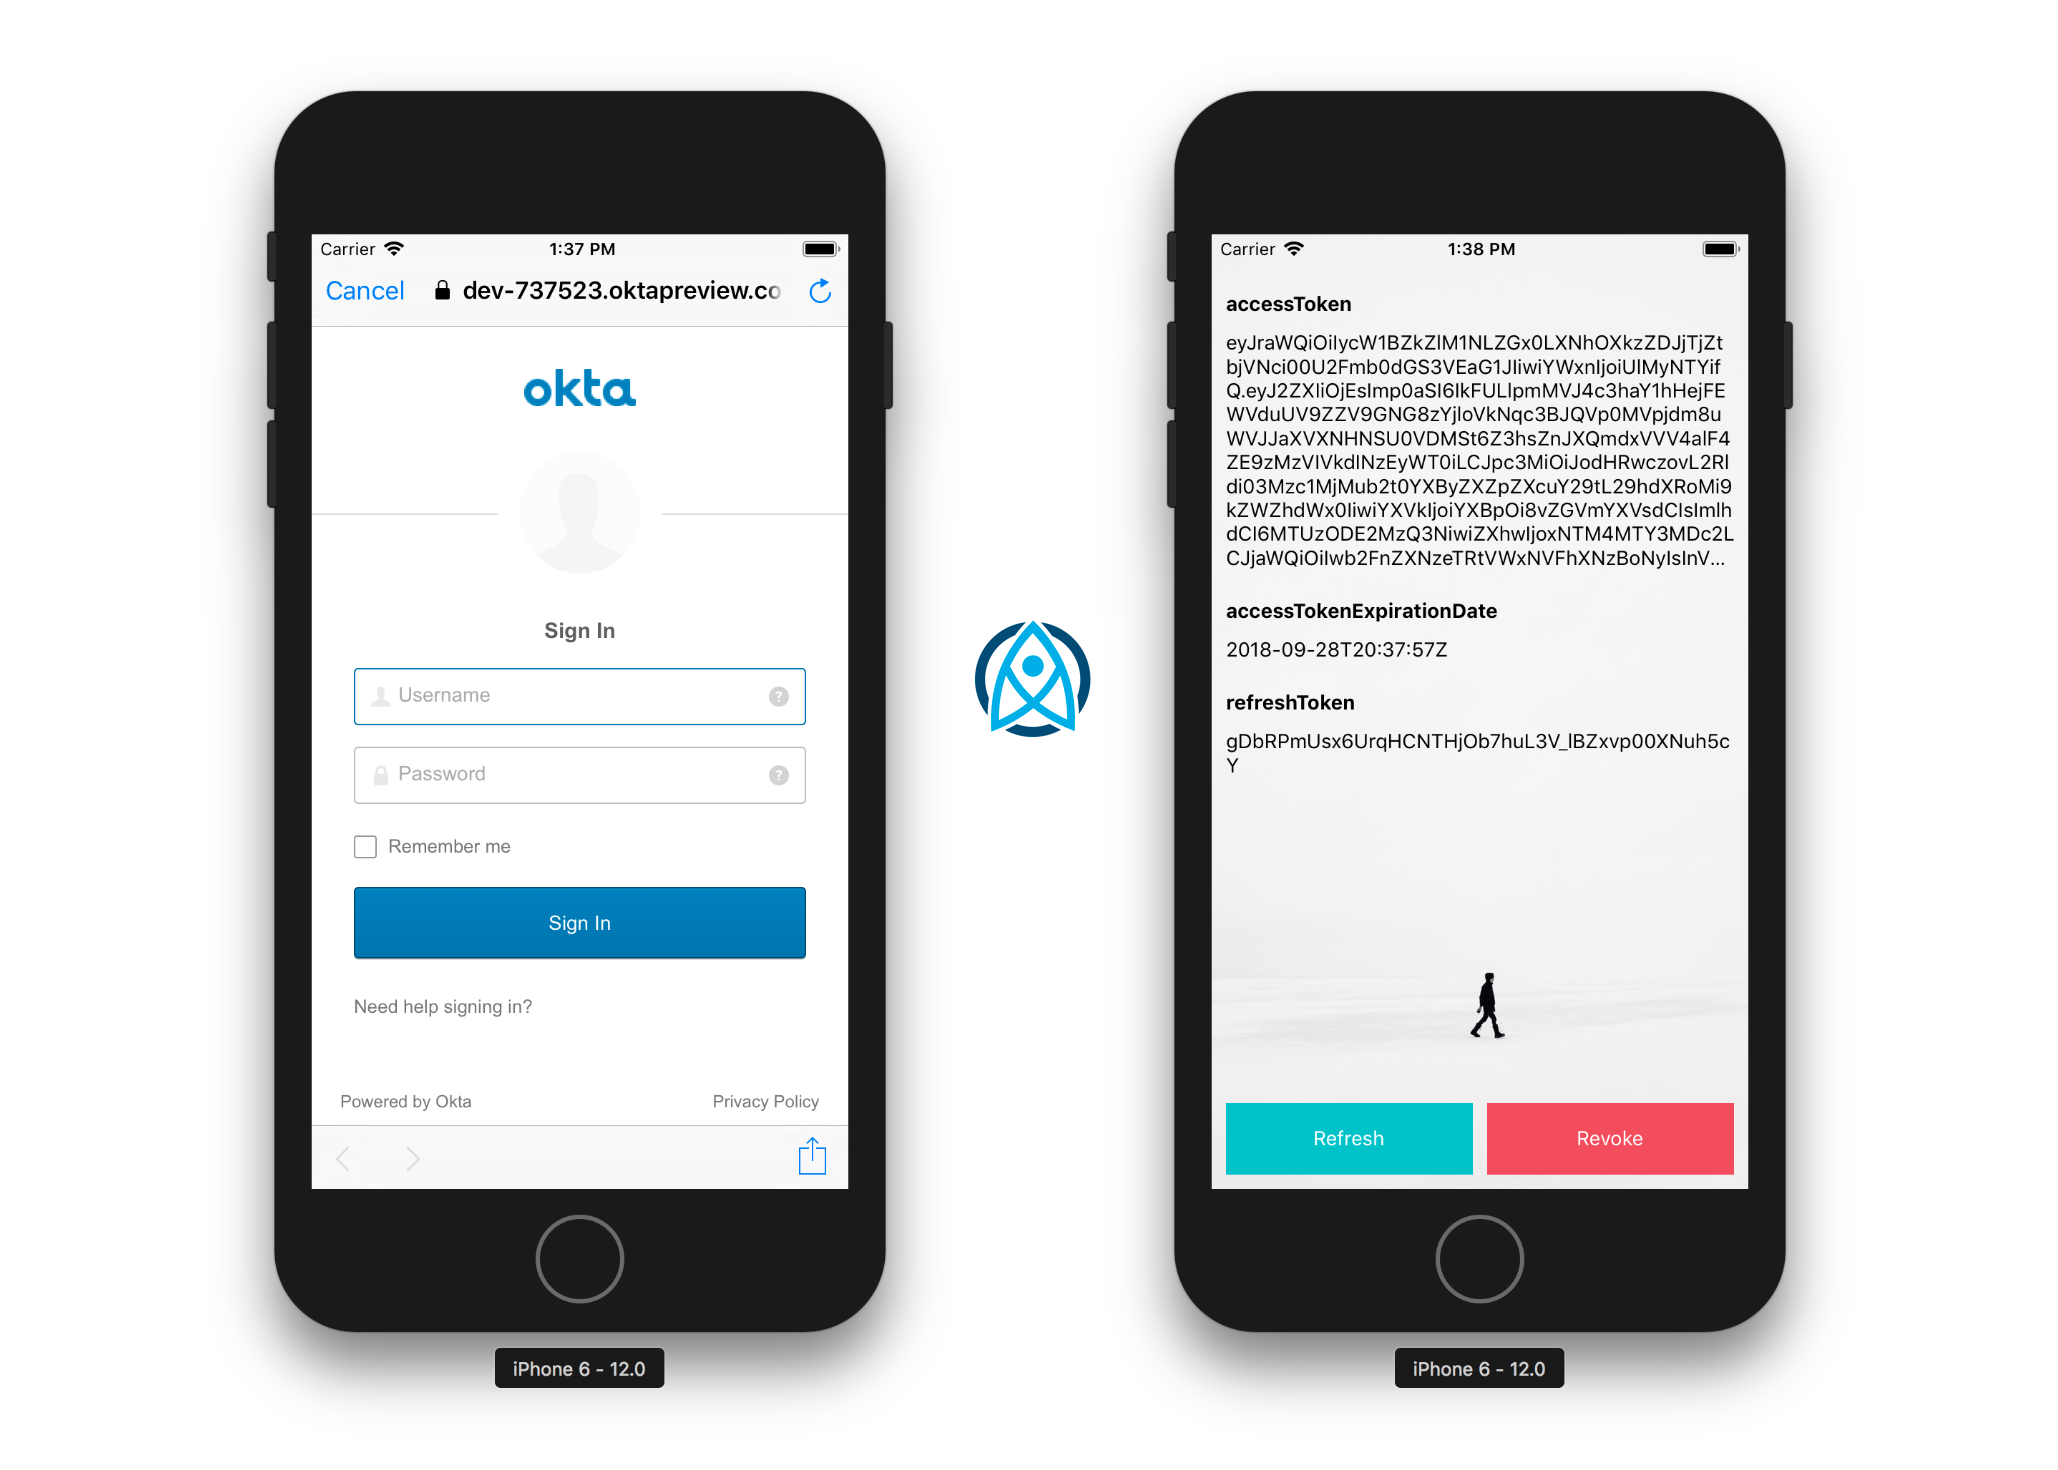 Build a React Native Application and Authenticate with OAuth 2.0